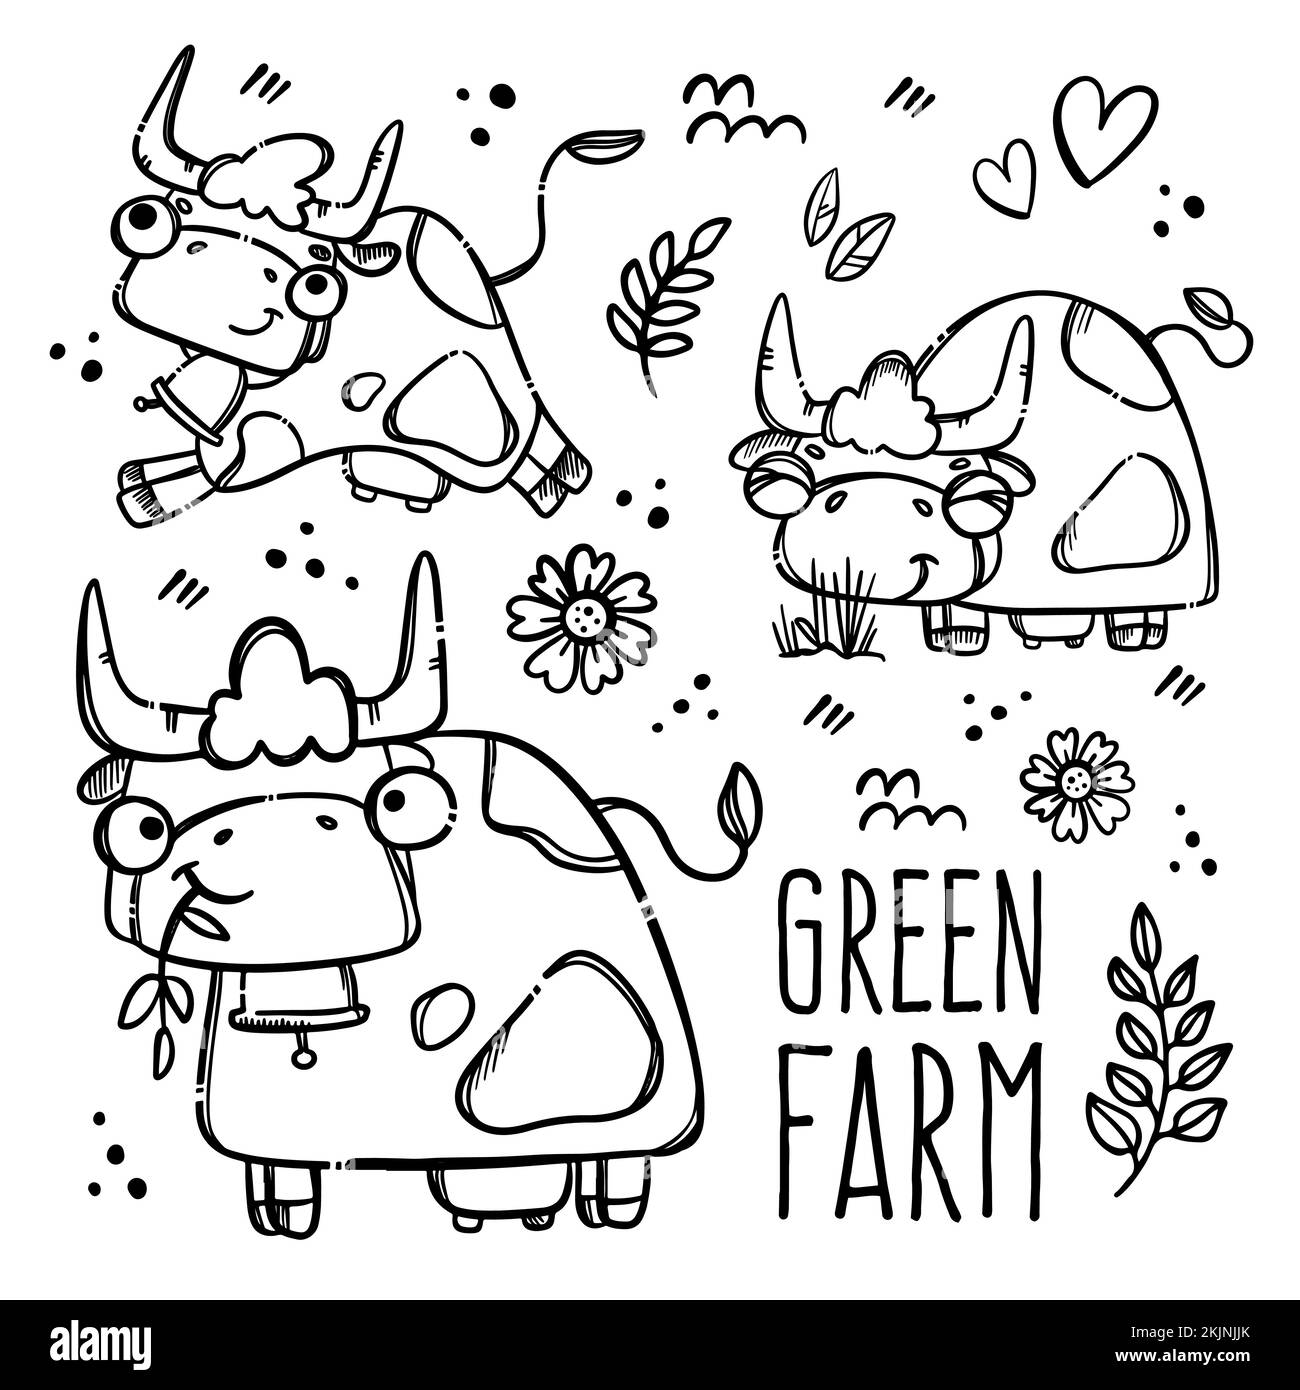 GREEN FARM MONOCHROME Cute Cows Hand-Drawn In Sketch Style Eat Grass And Leaves To Give Milk Cartoon Poster With Text Clip Art Vector Illustration Set Stock Vector